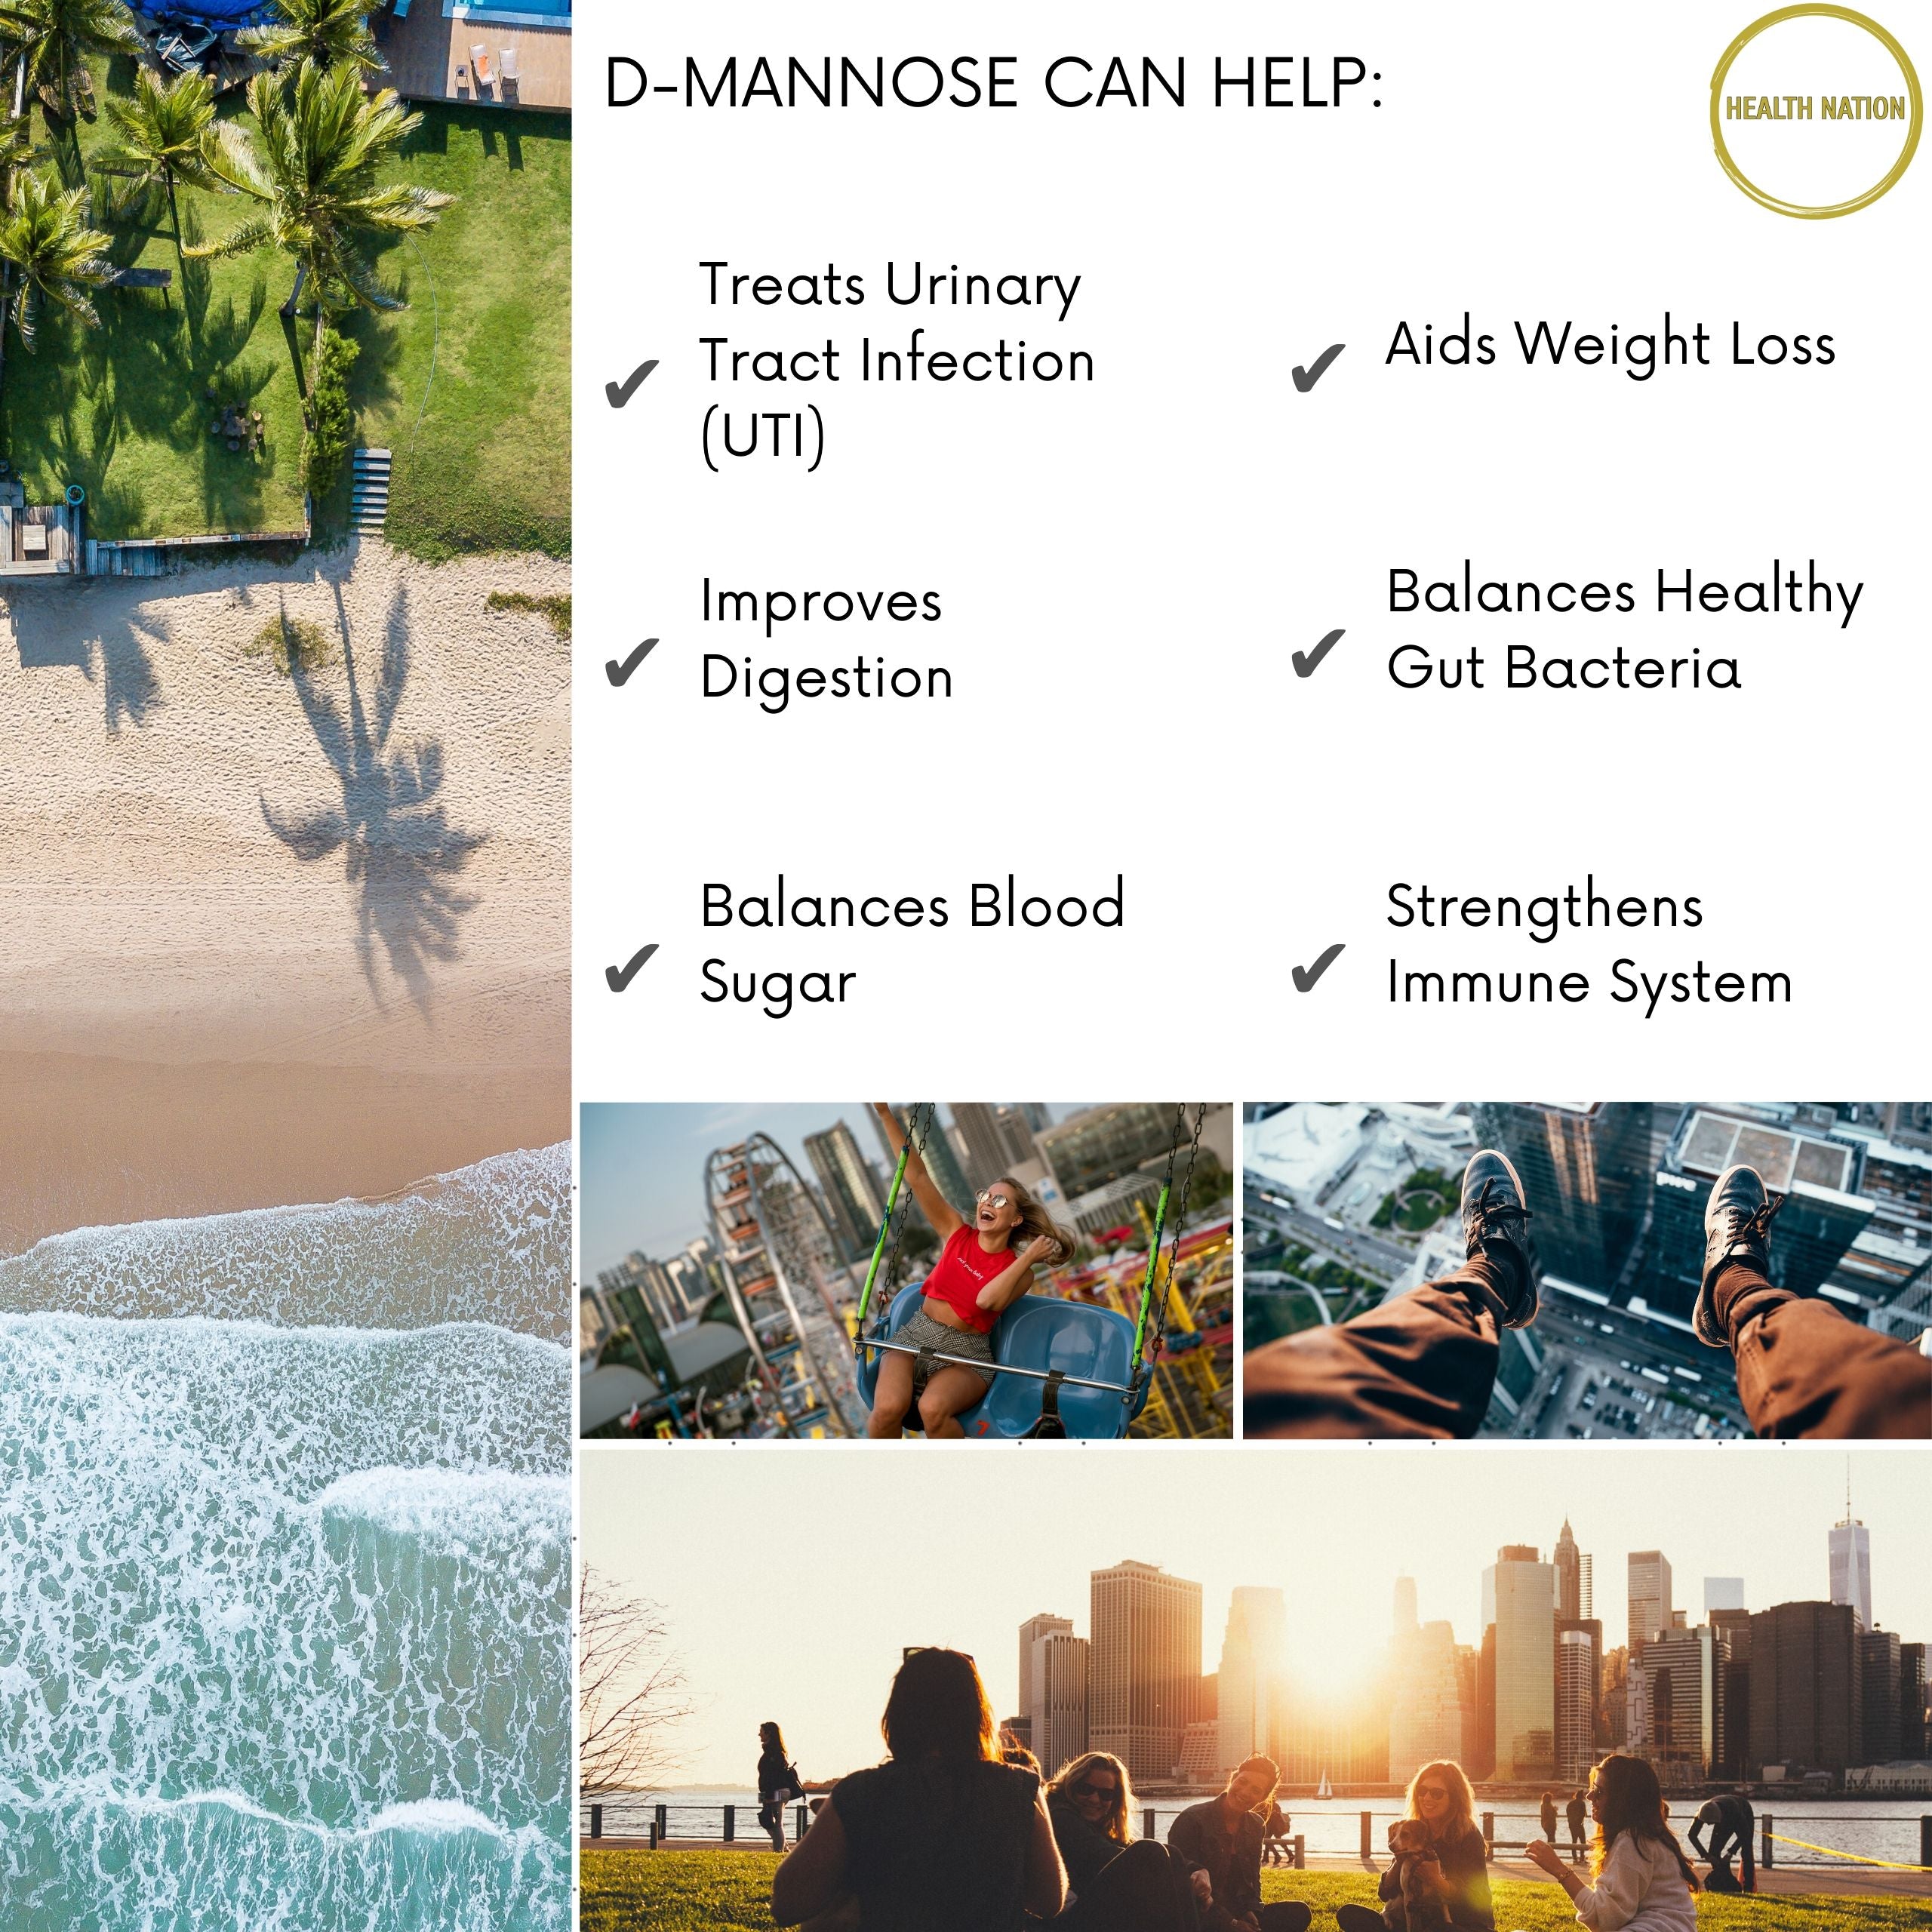 D-Mannose | Helps with Urinary Tract, Gut Bateria and Weight Loss | Made in UK | 500mg 90 Capsules - Health Nation